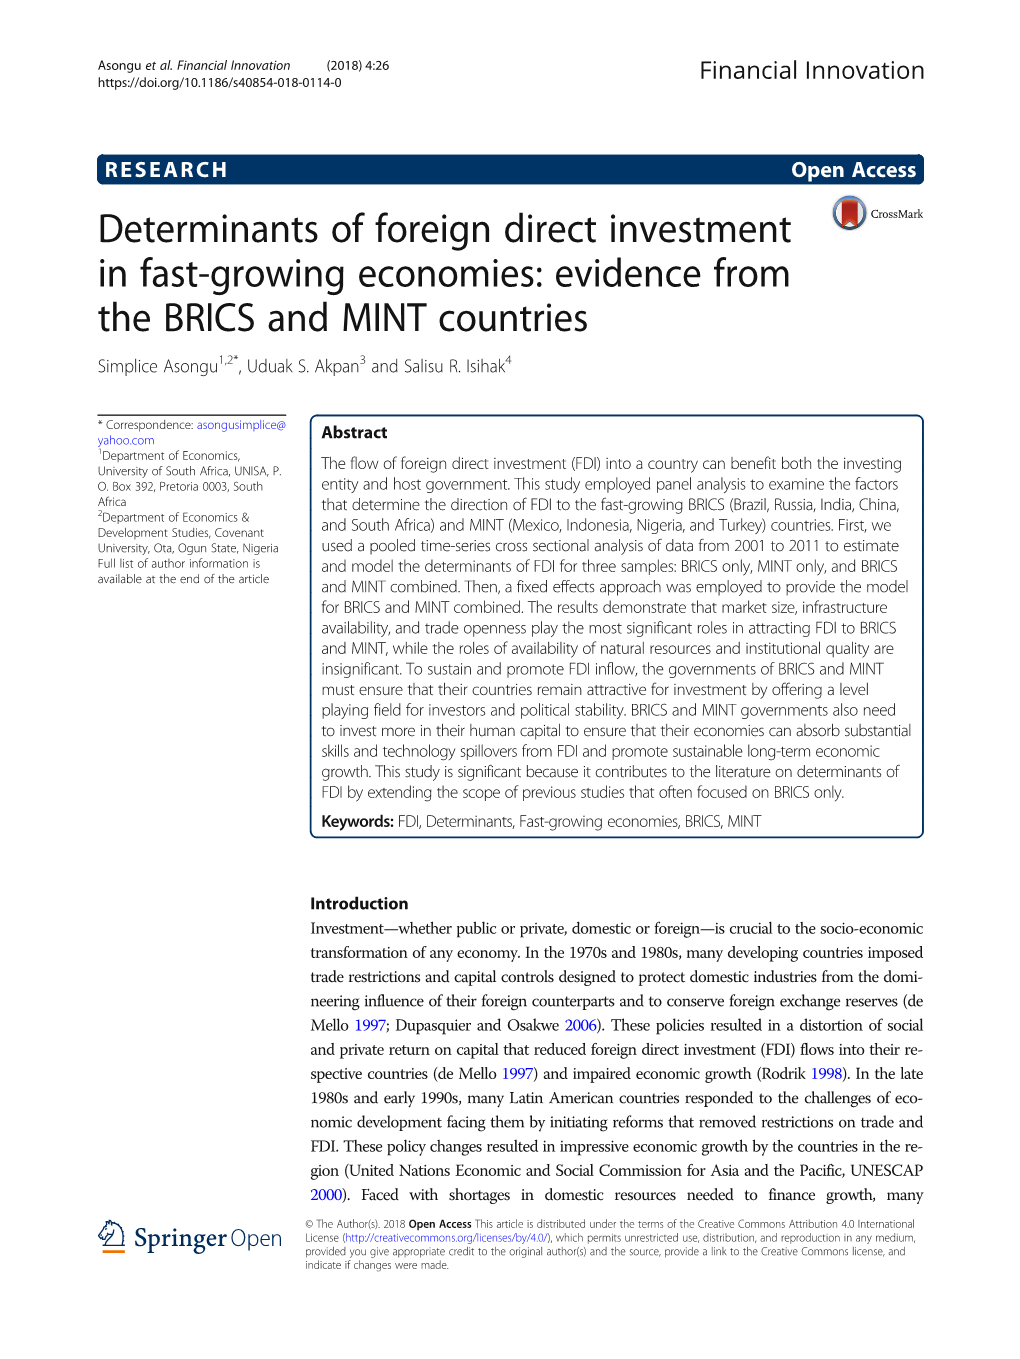 Determinants of Foreign Direct Investment in Fast-Growing Economies: Evidence from the BRICS and MINT Countries Simplice Asongu1,2*, Uduak S